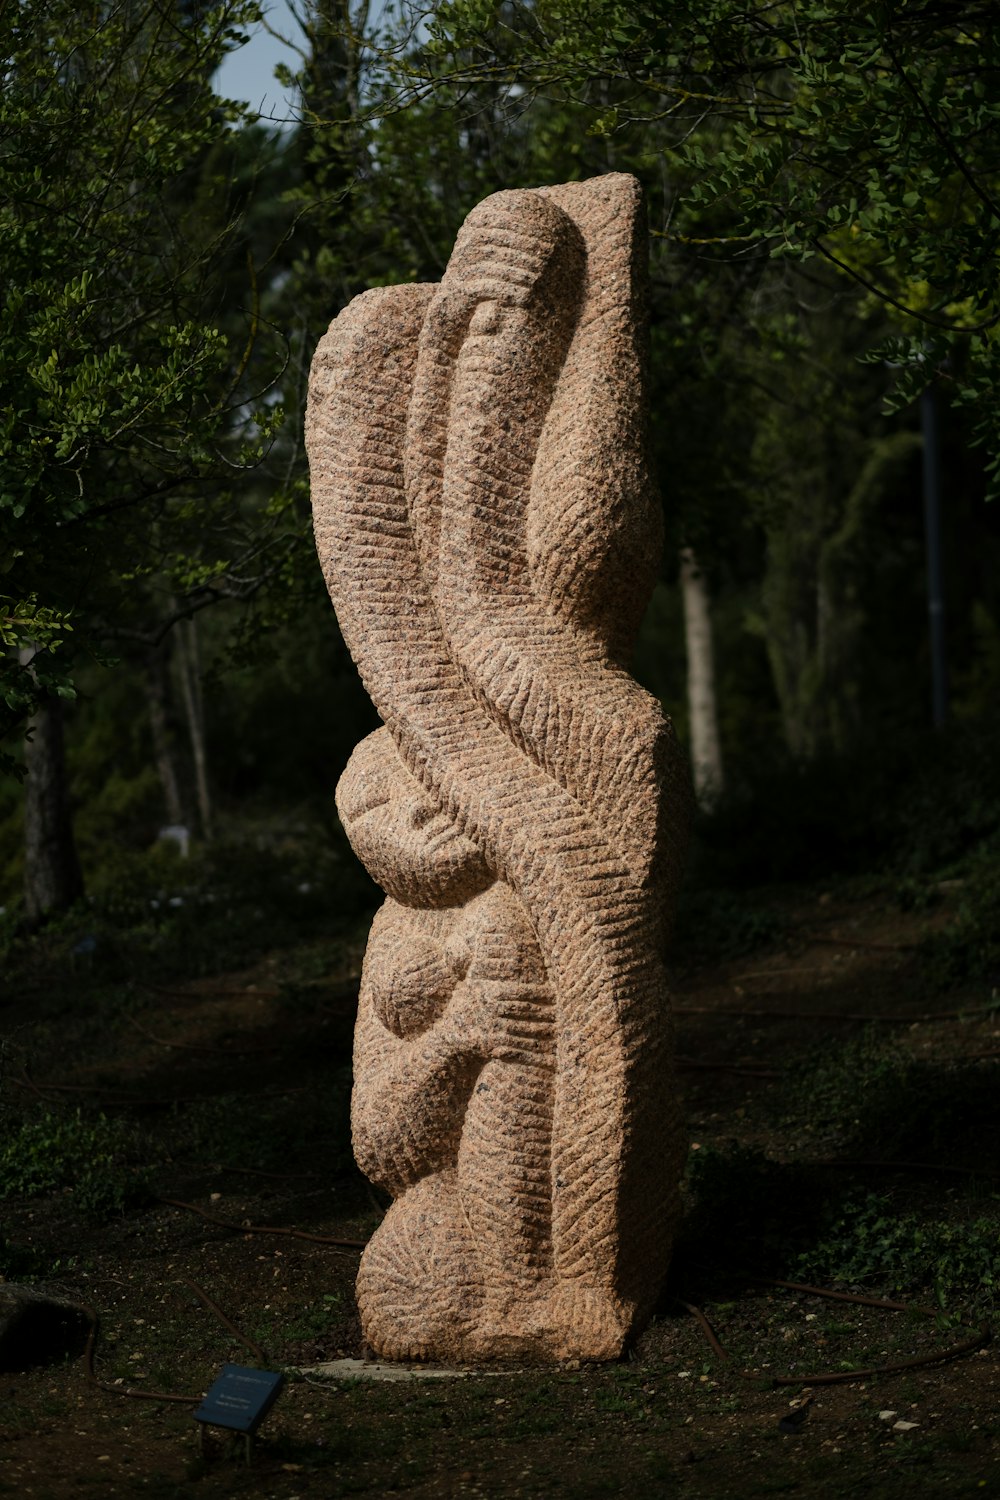 a sculpture of a woman holding a baby in her arms